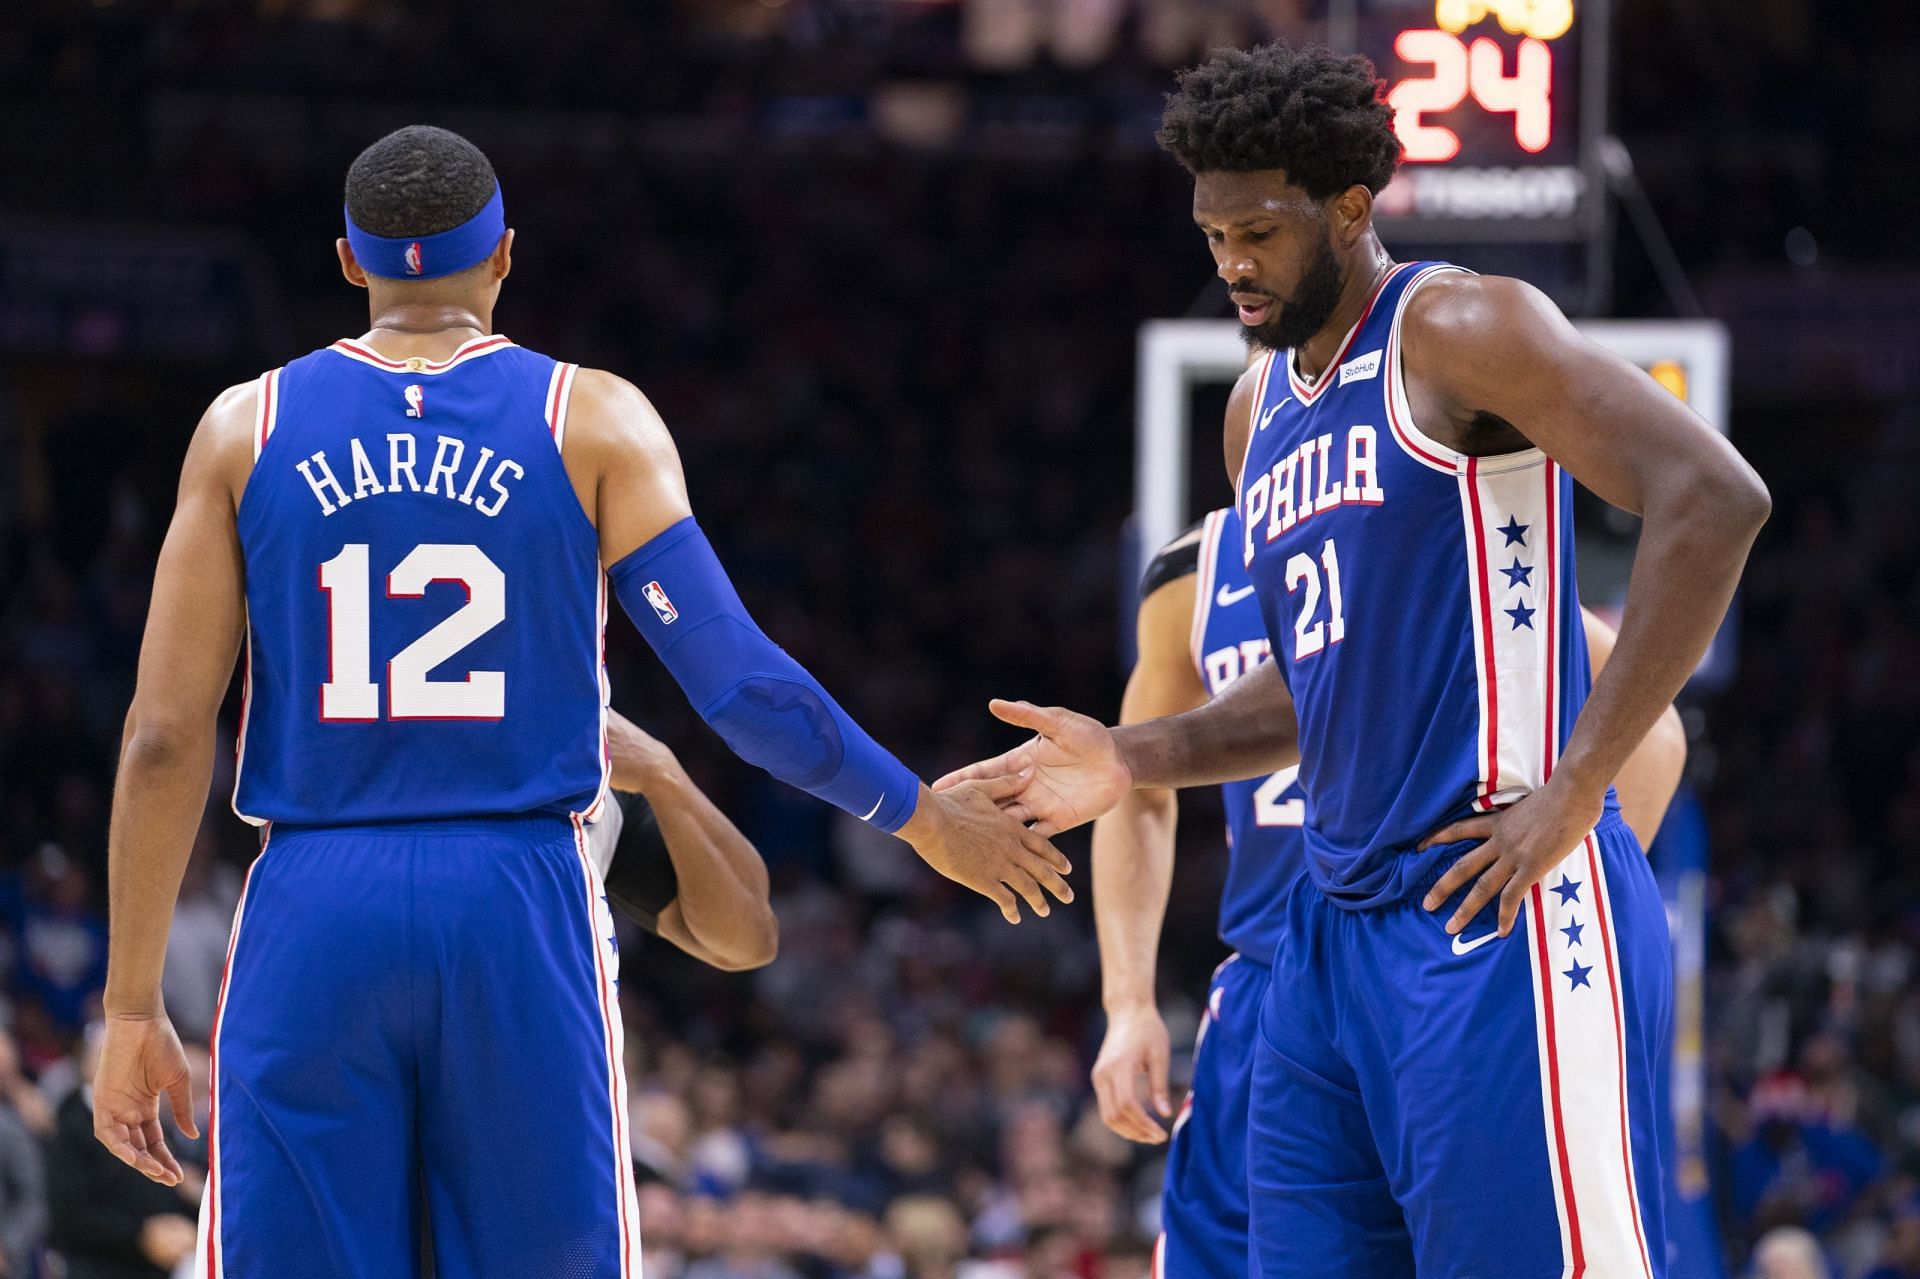 The Philadelphia 76ers lost two close games last week. [Photo: Section 215]